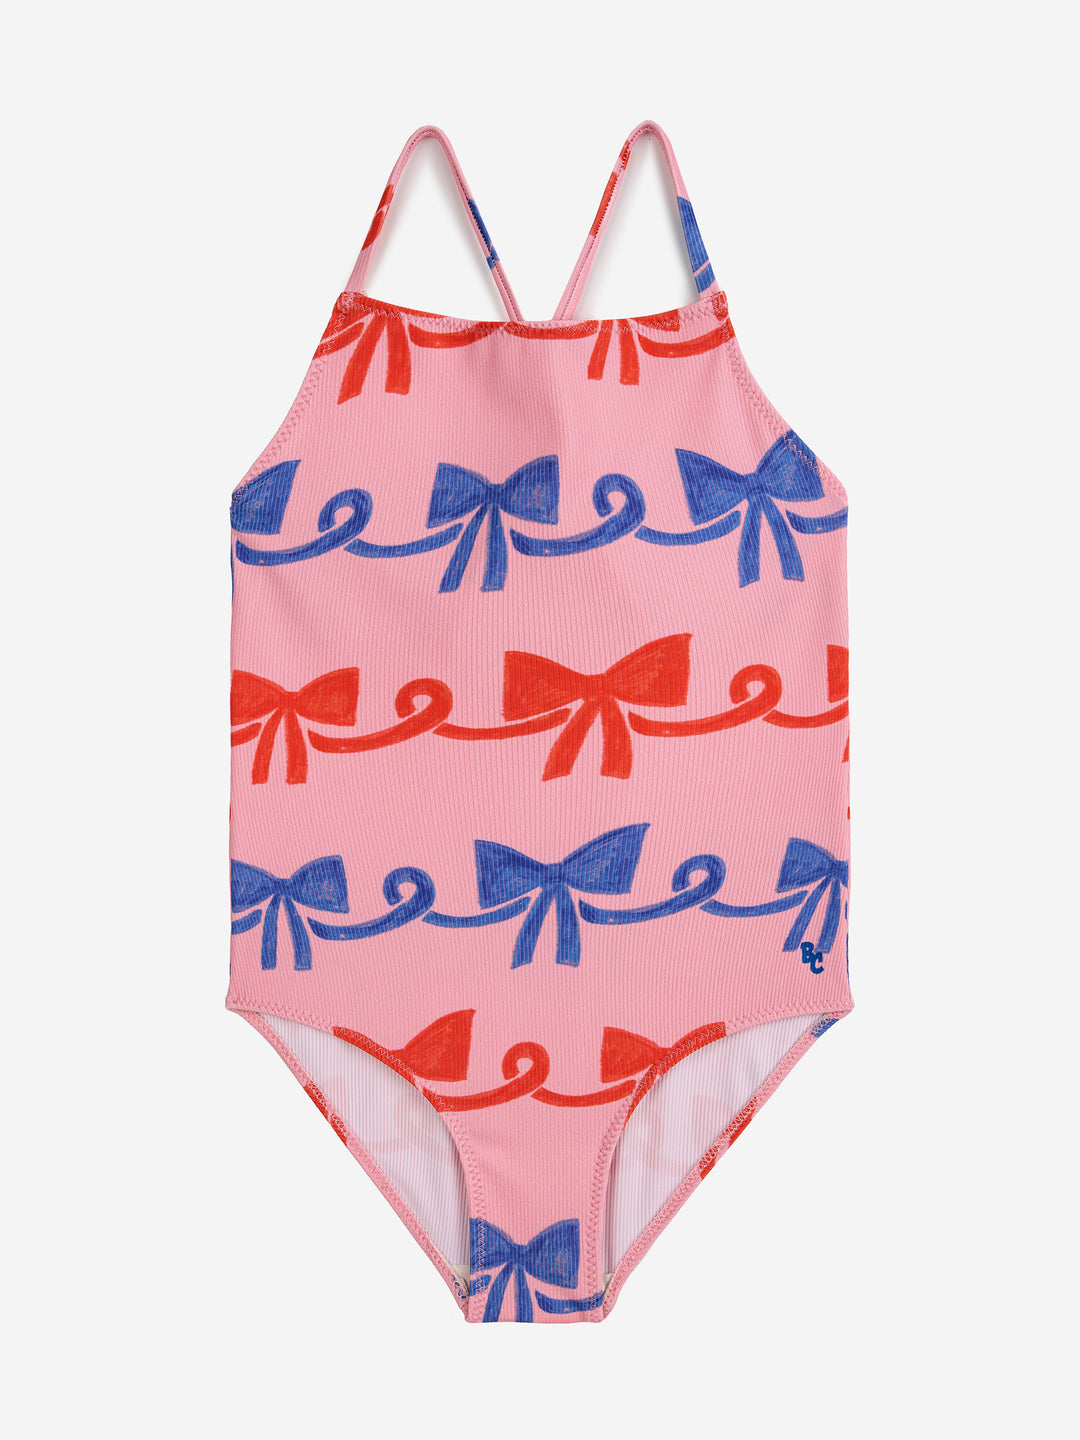 Ribbon Bow Swimsuit by Bobo Choses